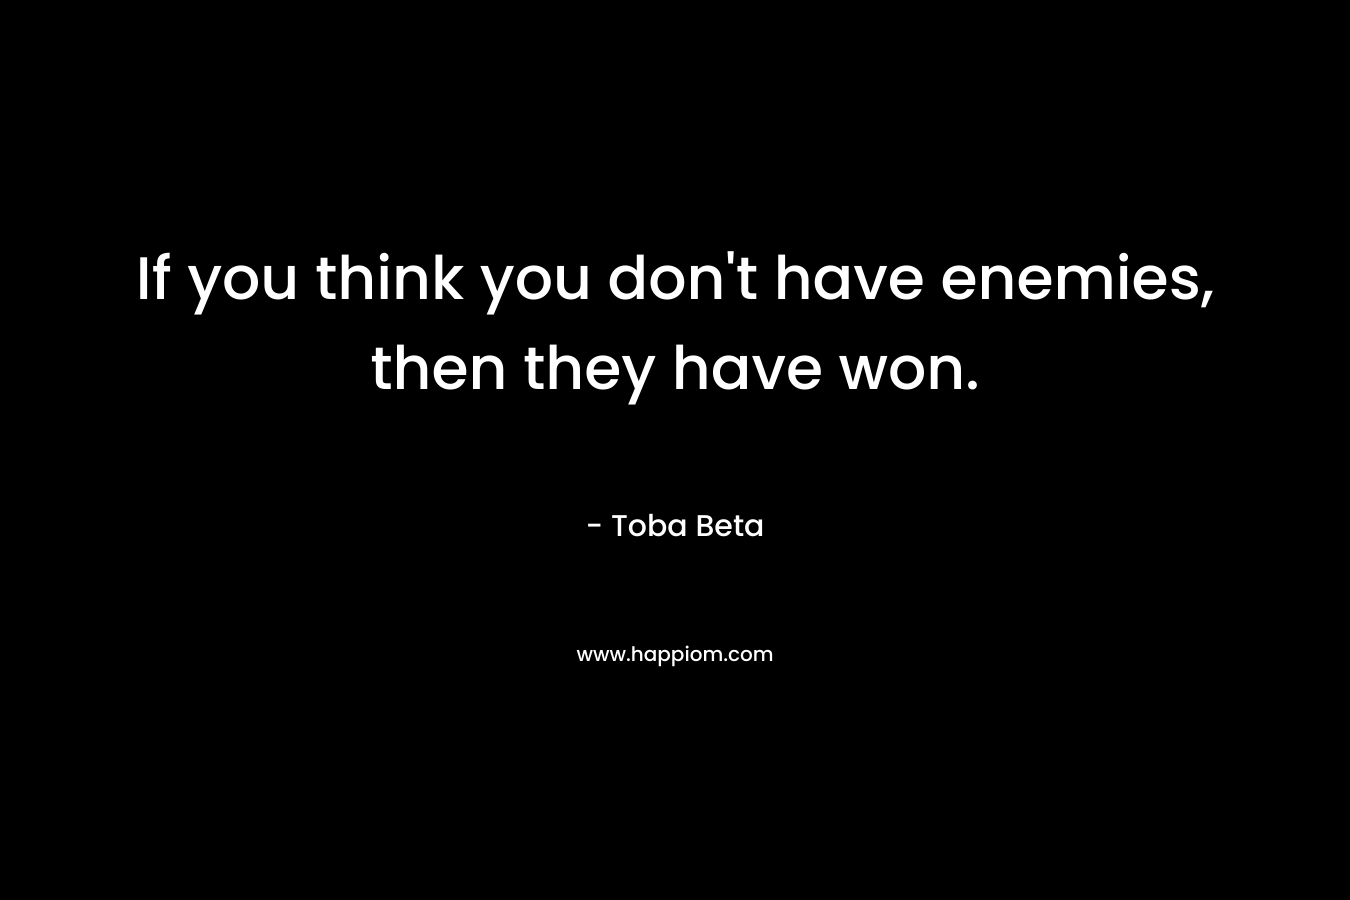 If you think you don't have enemies, then they have won.